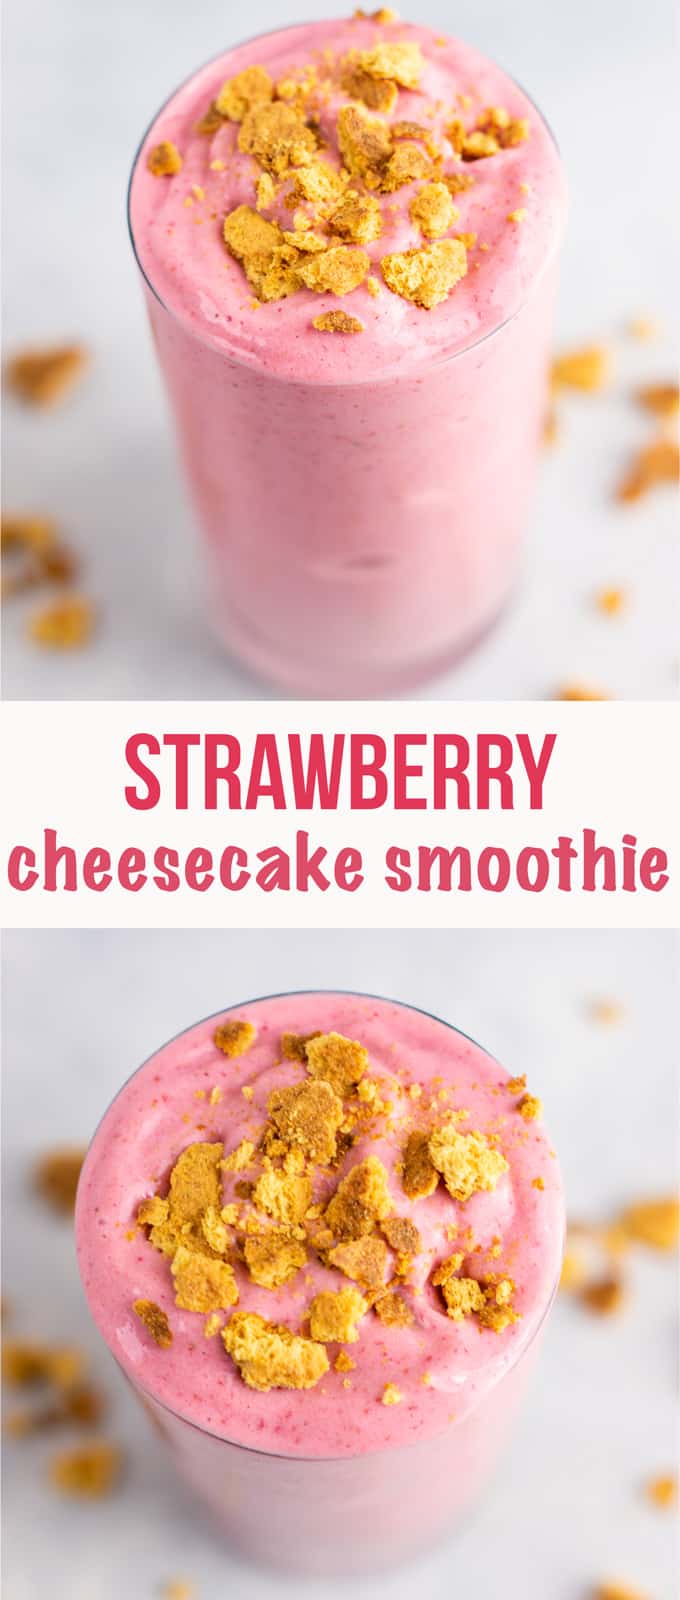 image with text "strawberry cheesecake smoothie"